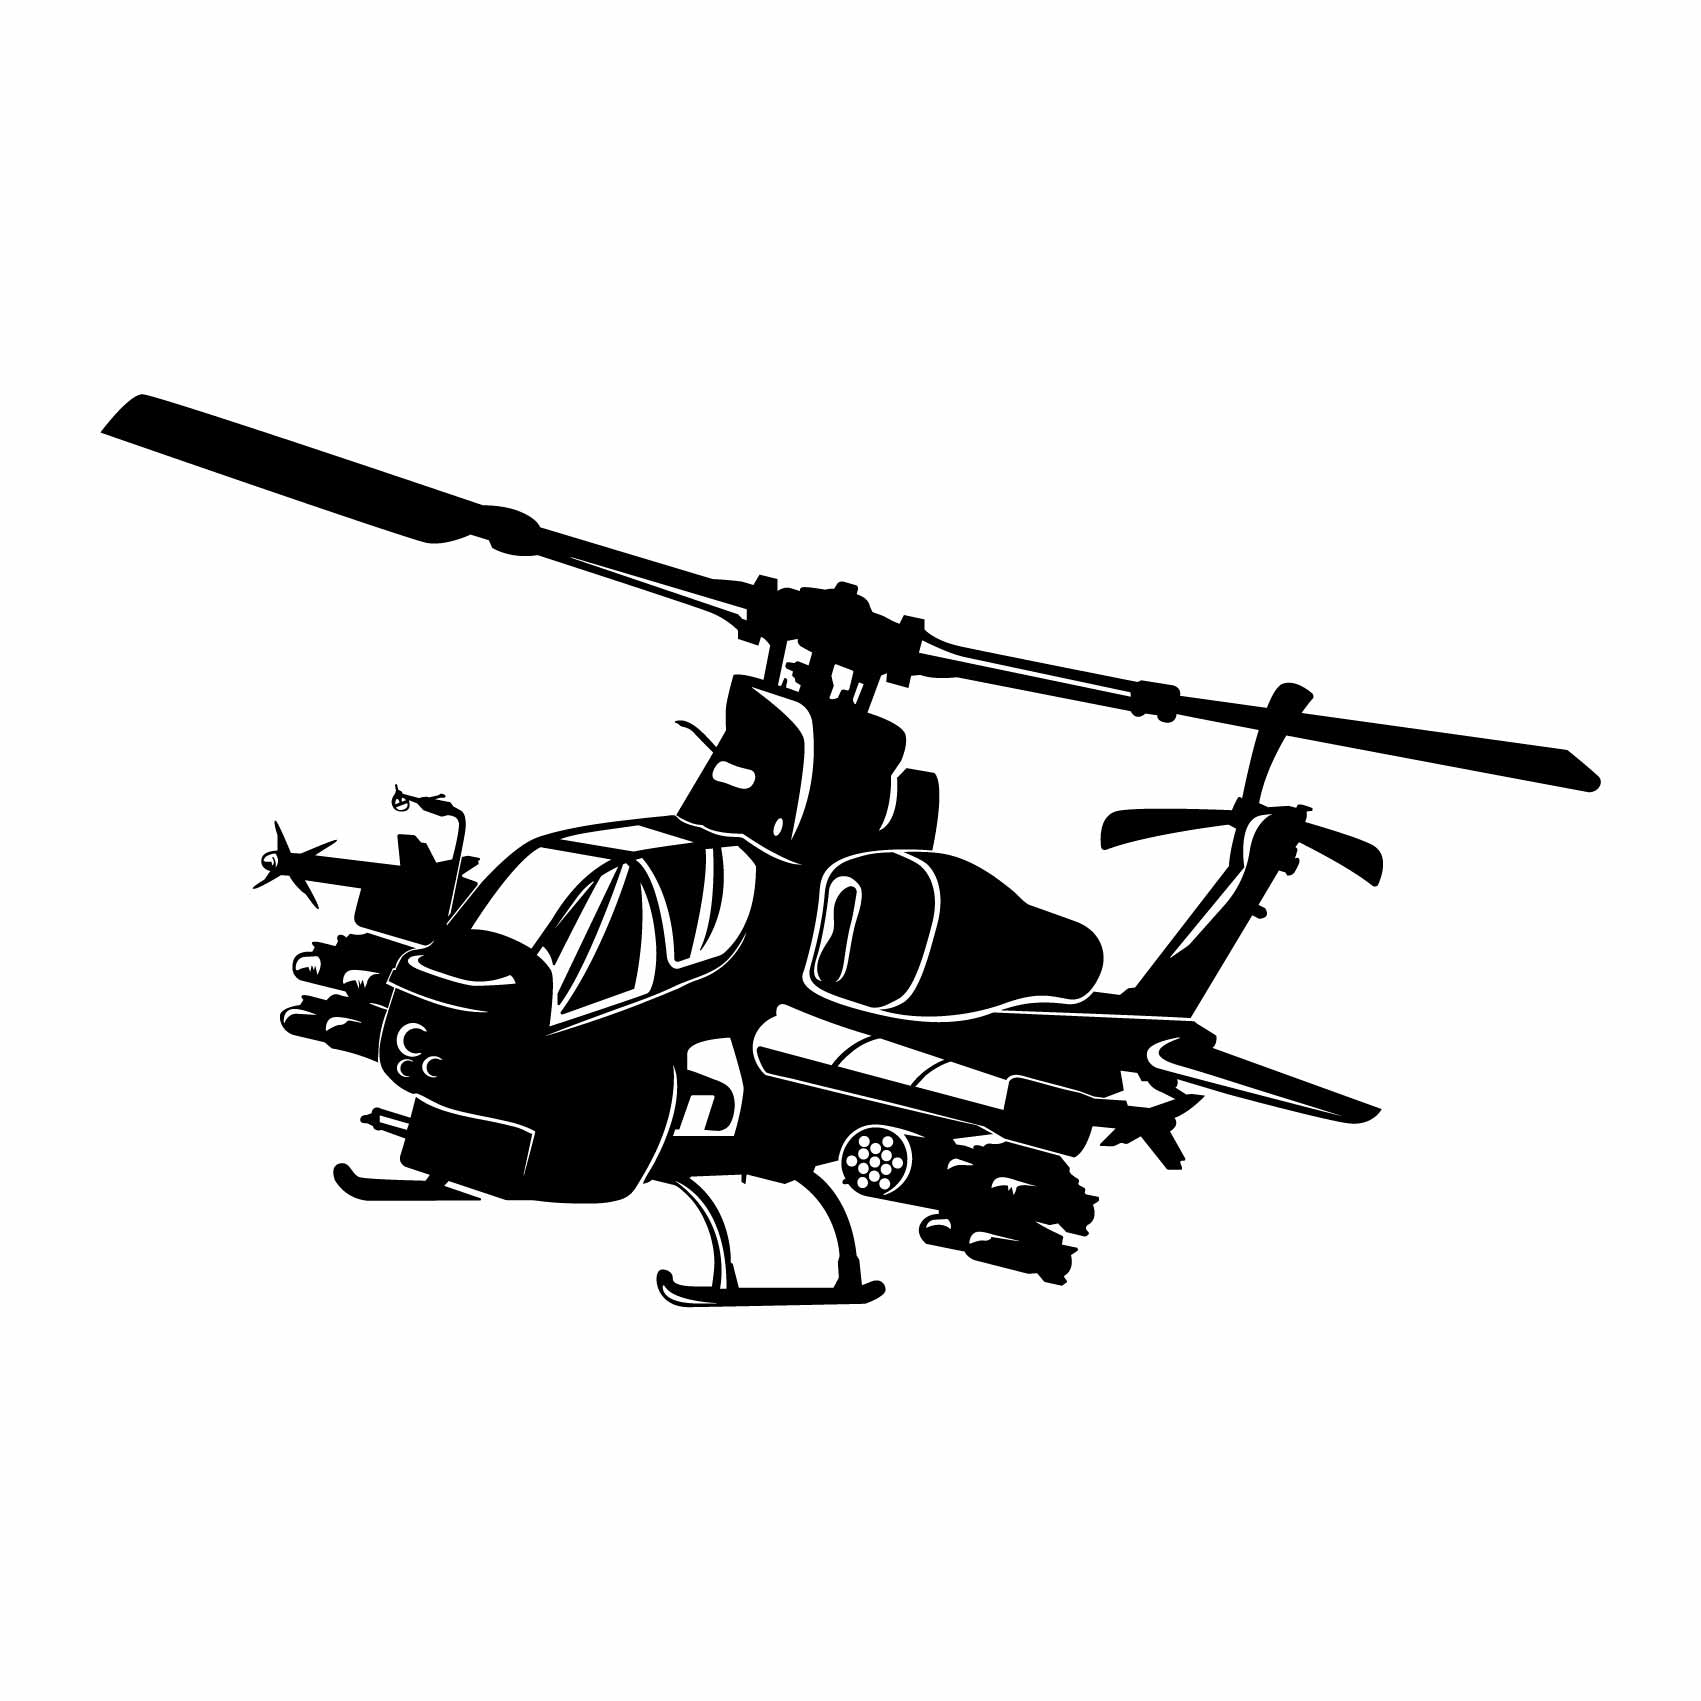 stickers-helicoptere-combat-ref5helicoptere-stickers-muraux-helicoptere-autocollant-deco-chambre-enfant-sticker-mural-hélicoptère-(2)